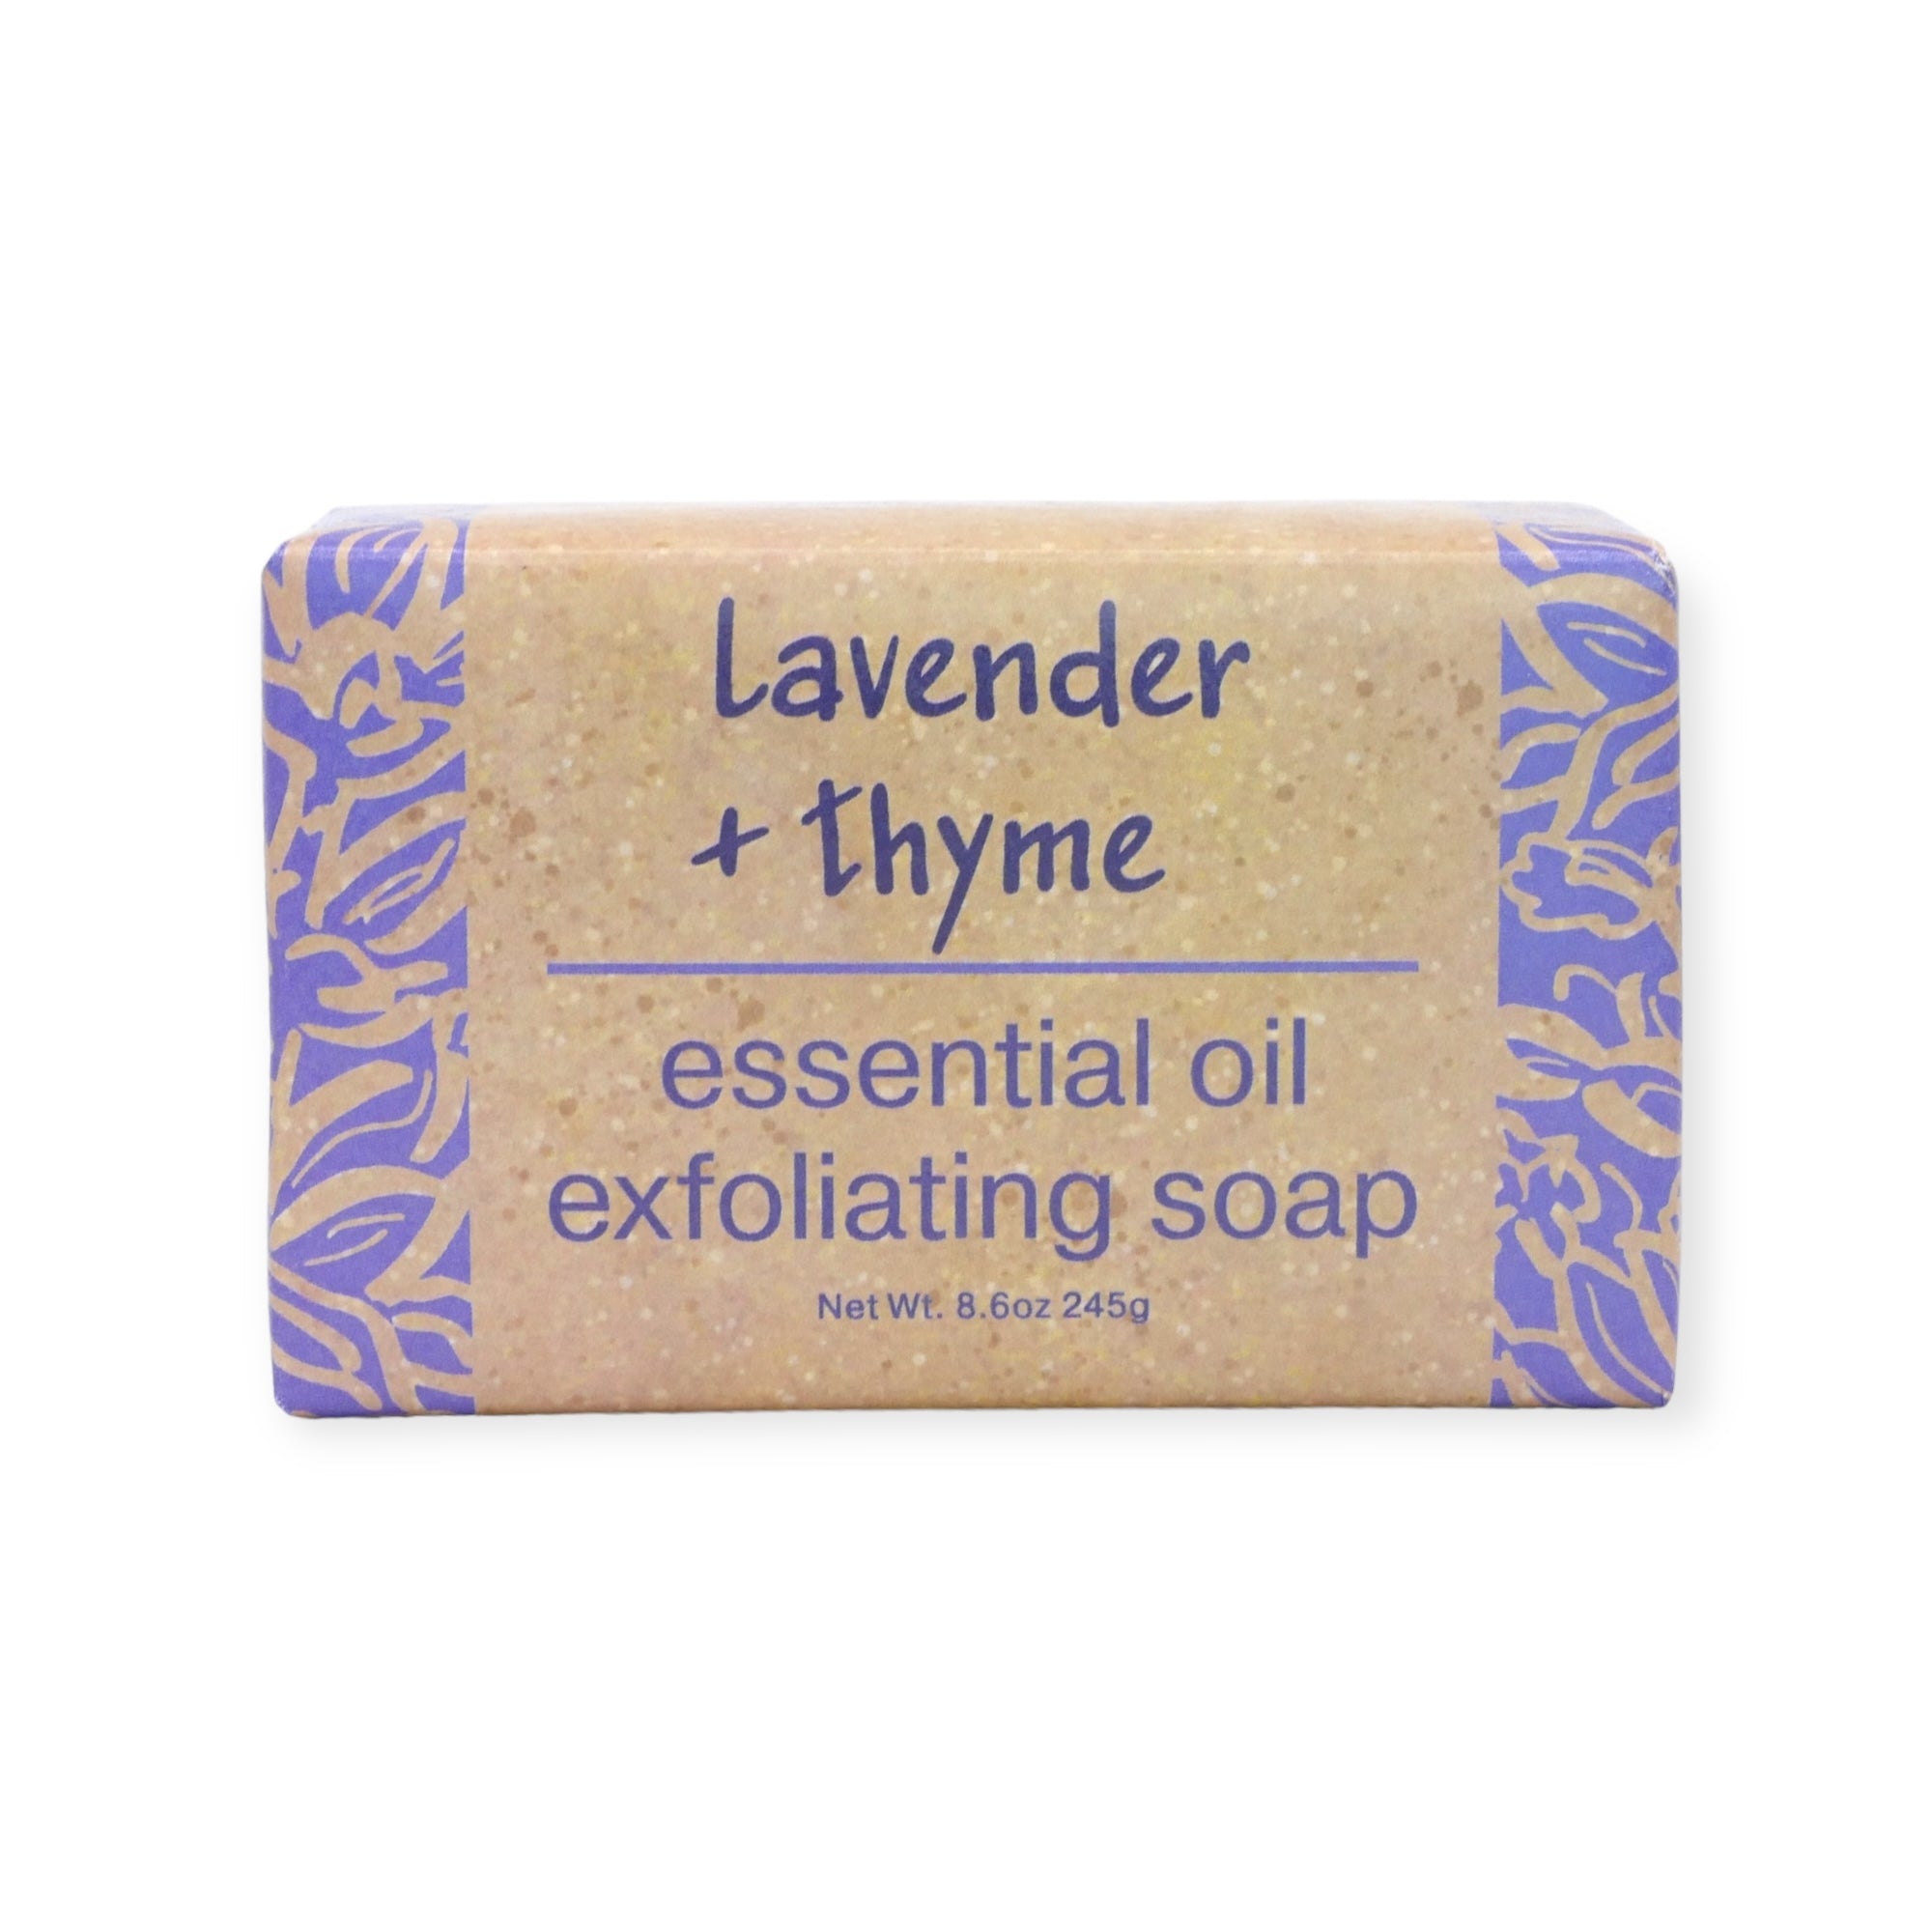 Lavender + Thyme Essential Oils Soap by Greenwich Bay Trading Co.